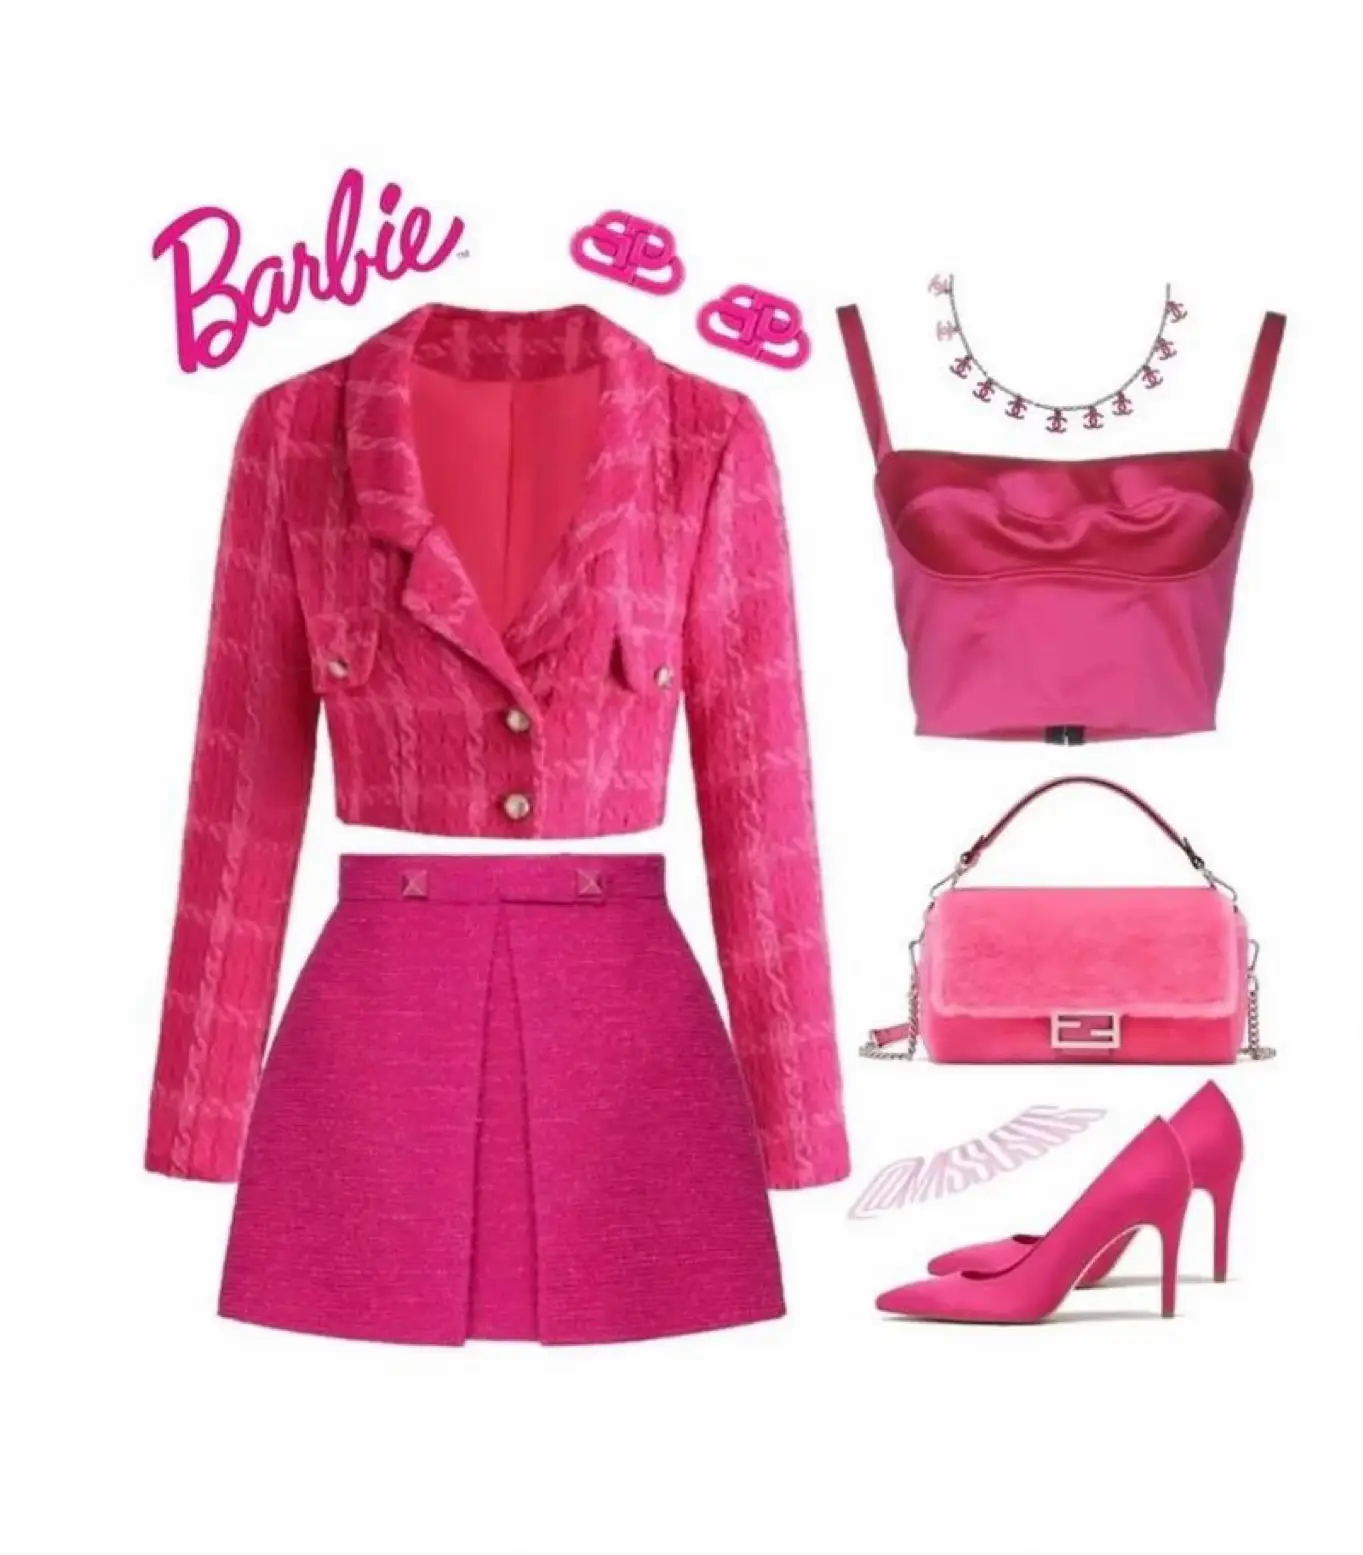 Accessorizing pink outfits for the Barbie movie - Lemon8 Search